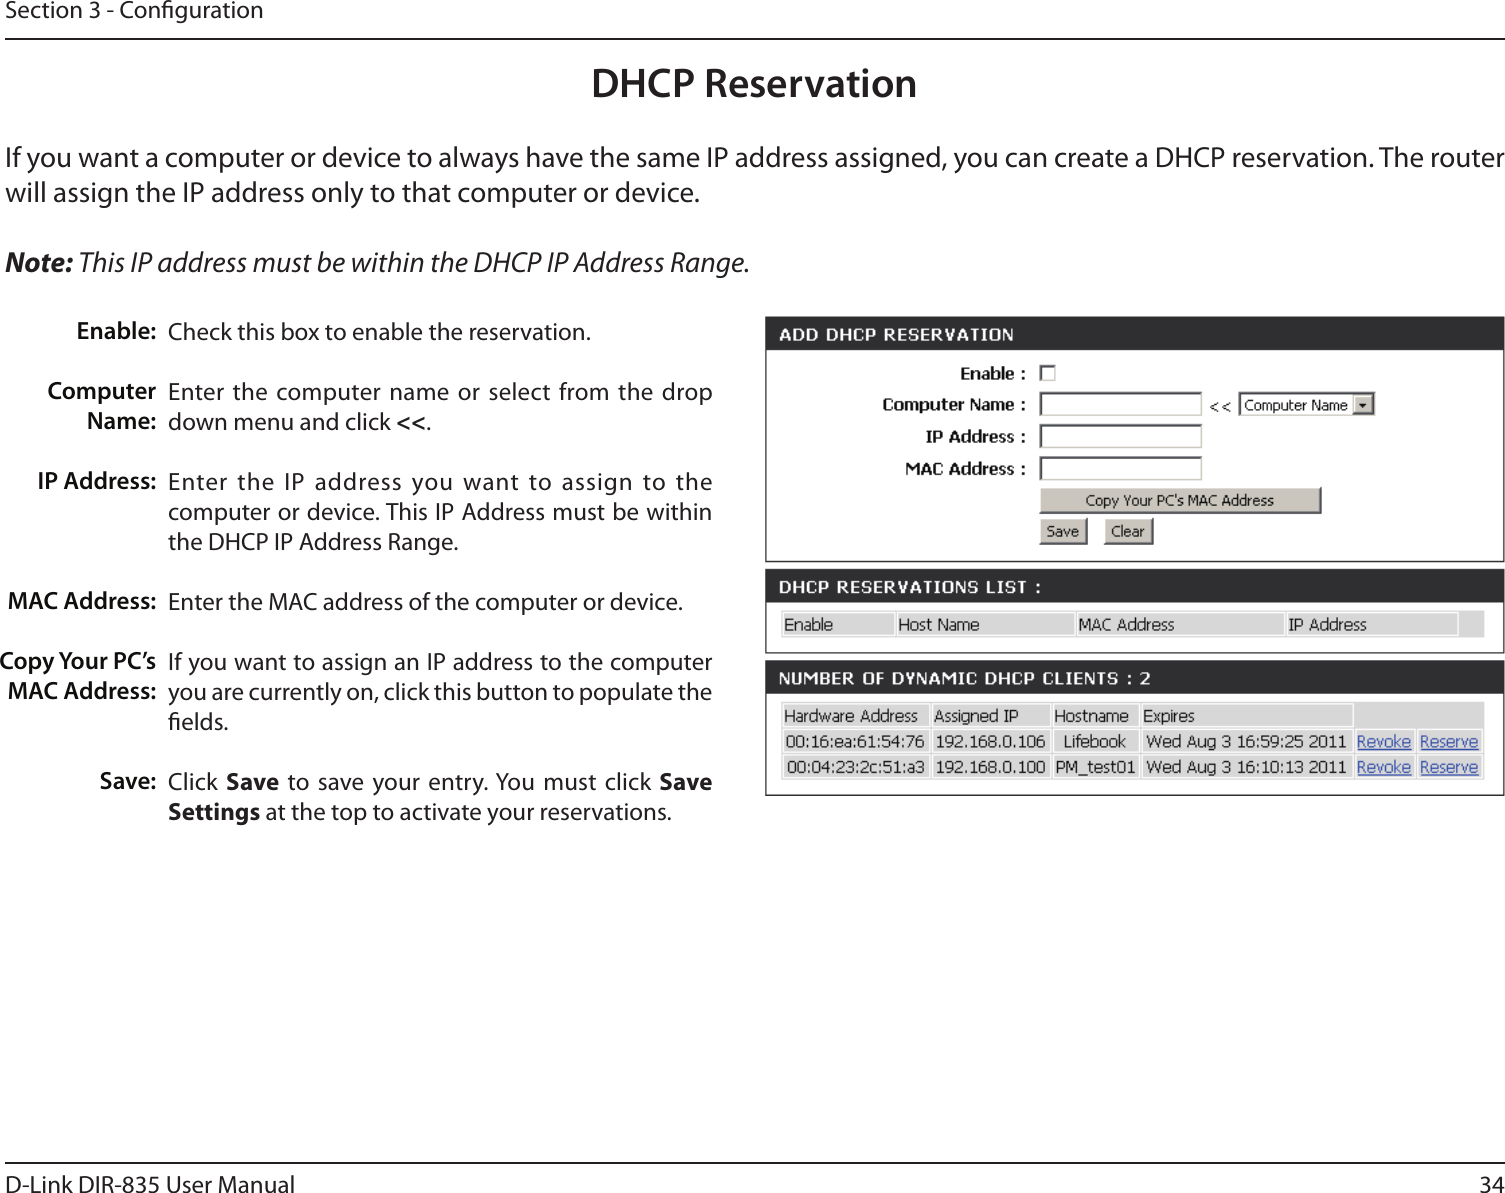 34D-Link DIR-835 User ManualSection 3 - CongurationDHCP ReservationIf you want a computer or device to always have the same IP address assigned, you can create a DHCP reservation. The router will assign the IP address only to that computer or device. Note: This IP address must be within the DHCP IP Address Range.Check this box to enable the reservation.Enter the computer name  or select  from the drop down menu and click &lt;&lt;.Enter the IP  address you want to assign to the computer or device. This IP Address must be within the DHCP IP Address Range.Enter the MAC address of the computer or device.If you want to assign an IP address to the computer you are currently on, click this button to populate the elds. Click Save to save your entry. You  must click Save Settings at the top to activate your reservations. Enable:Computer Name:IP Address:MAC Address:Copy Your PC’s MAC Address:Save: